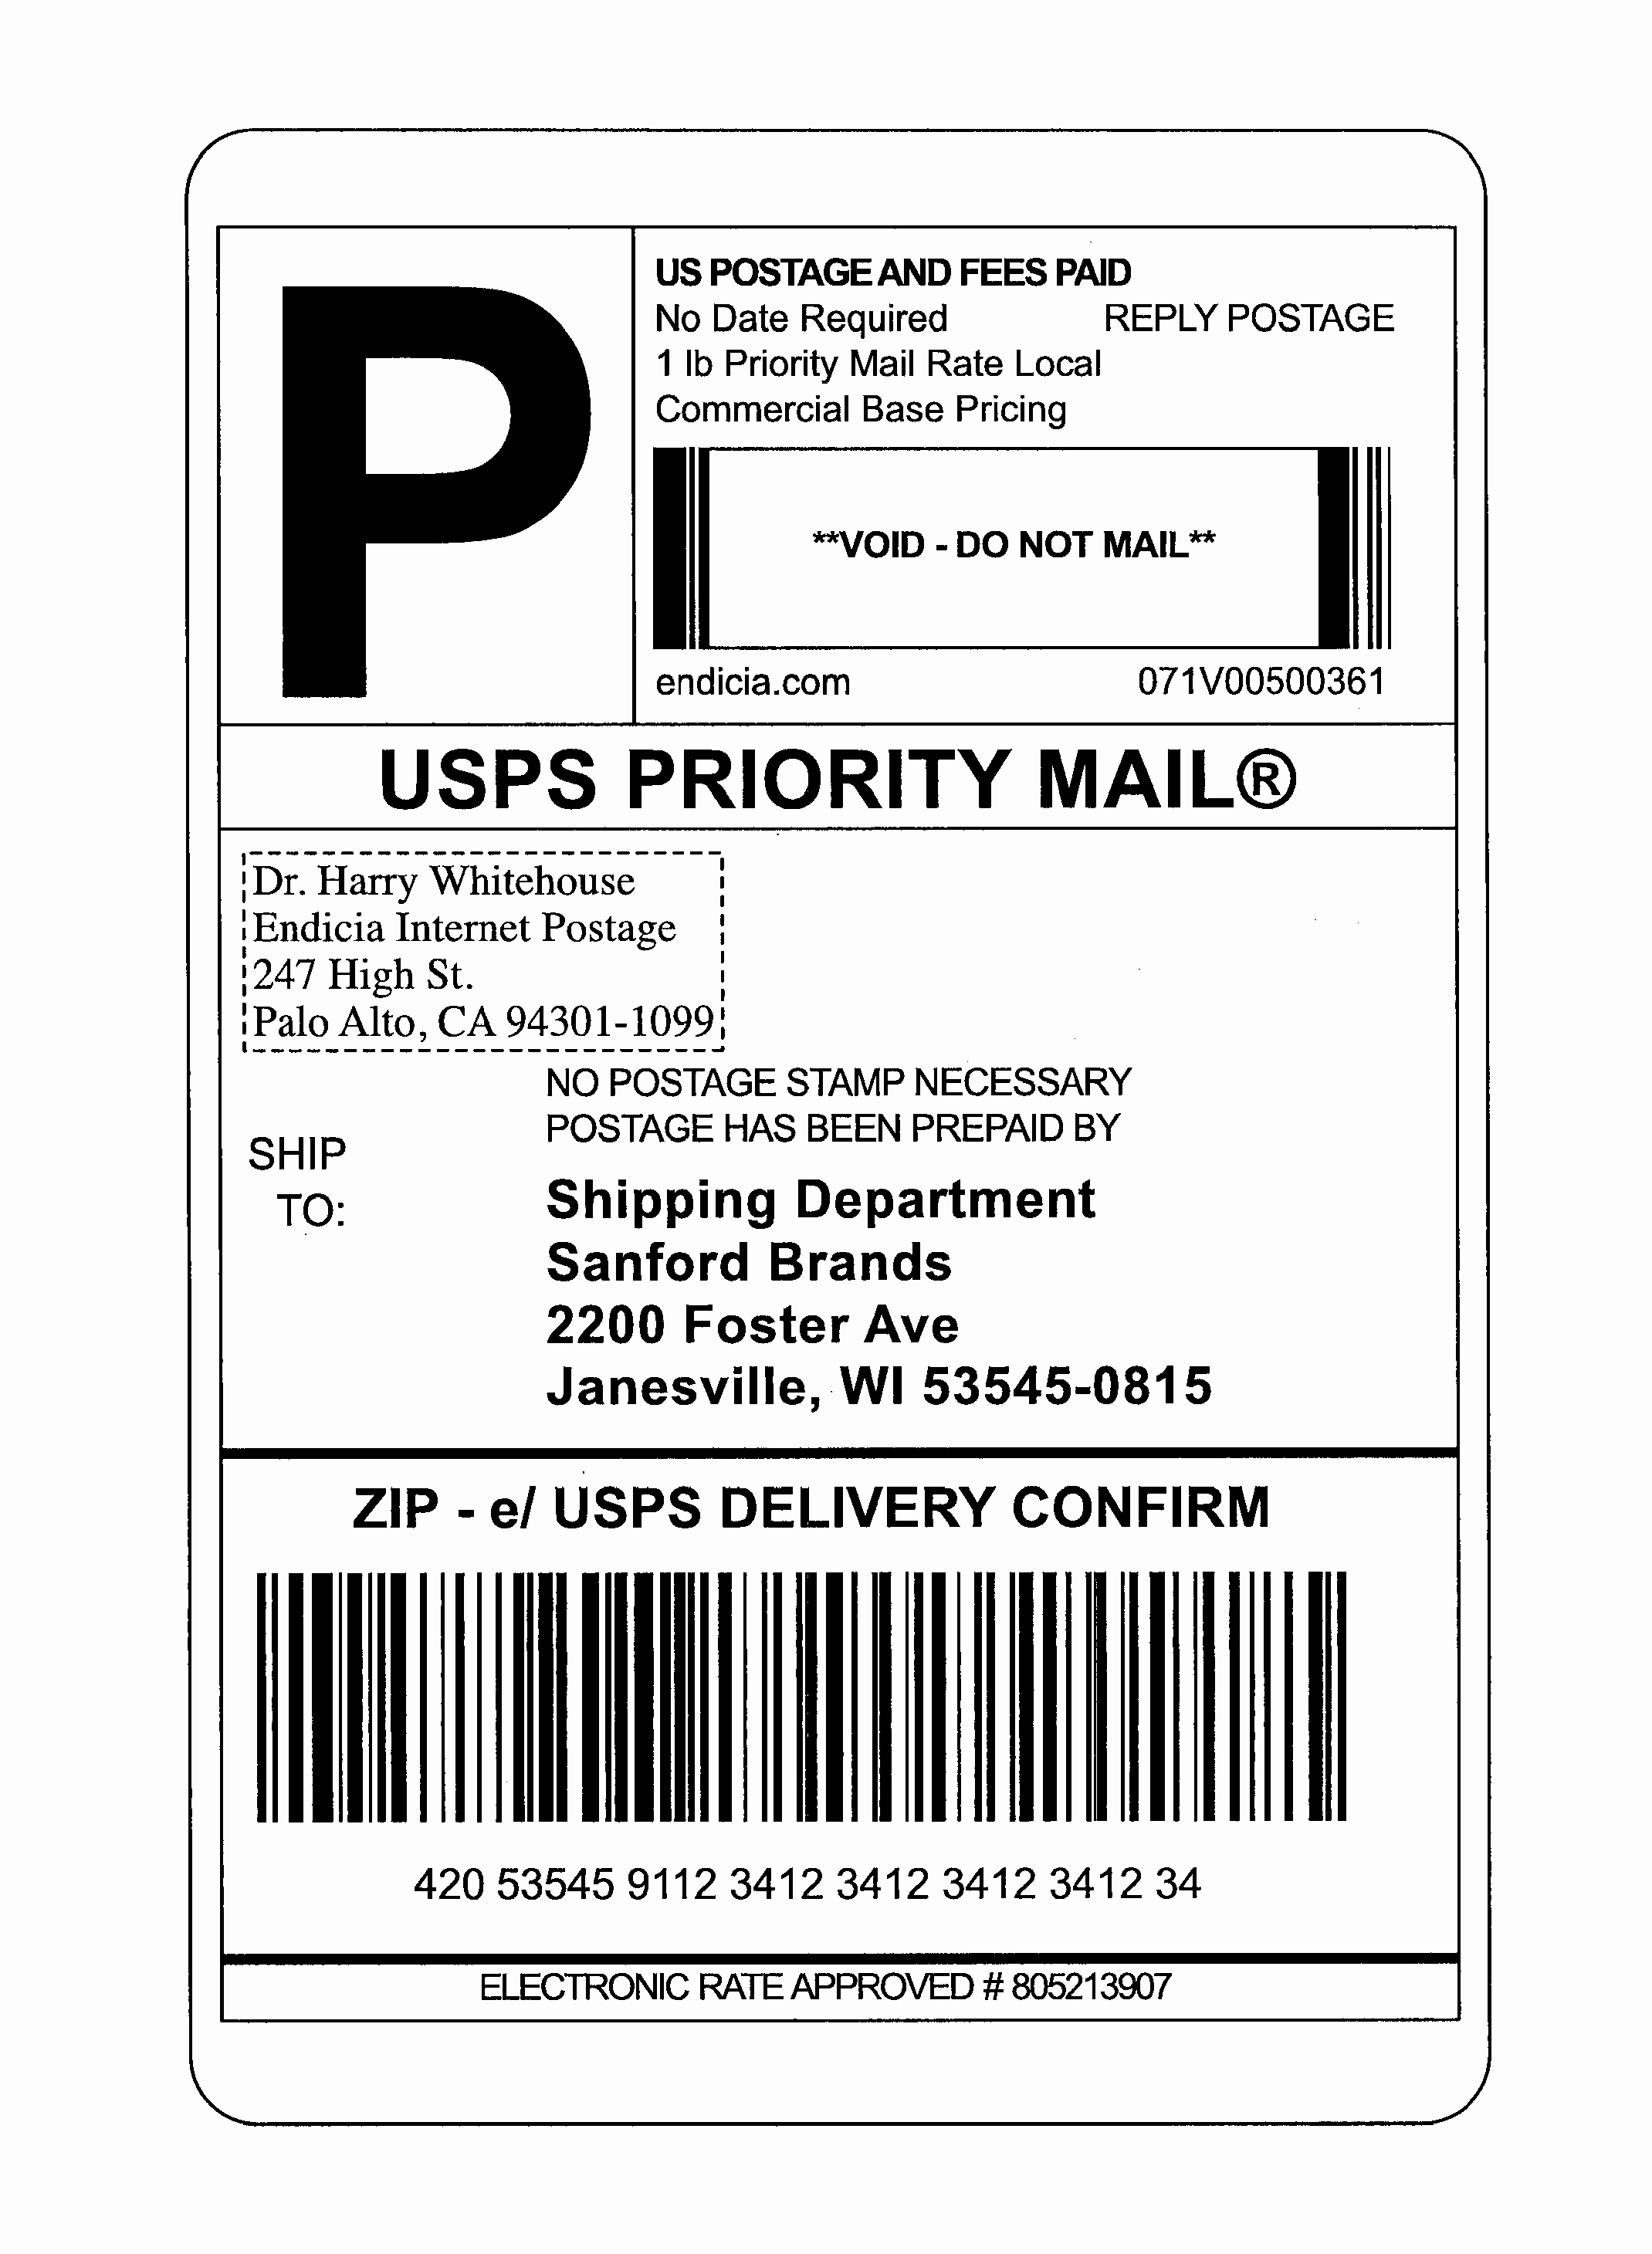 Free Shipping Label Template Inspirational Shipping Label Template Usps